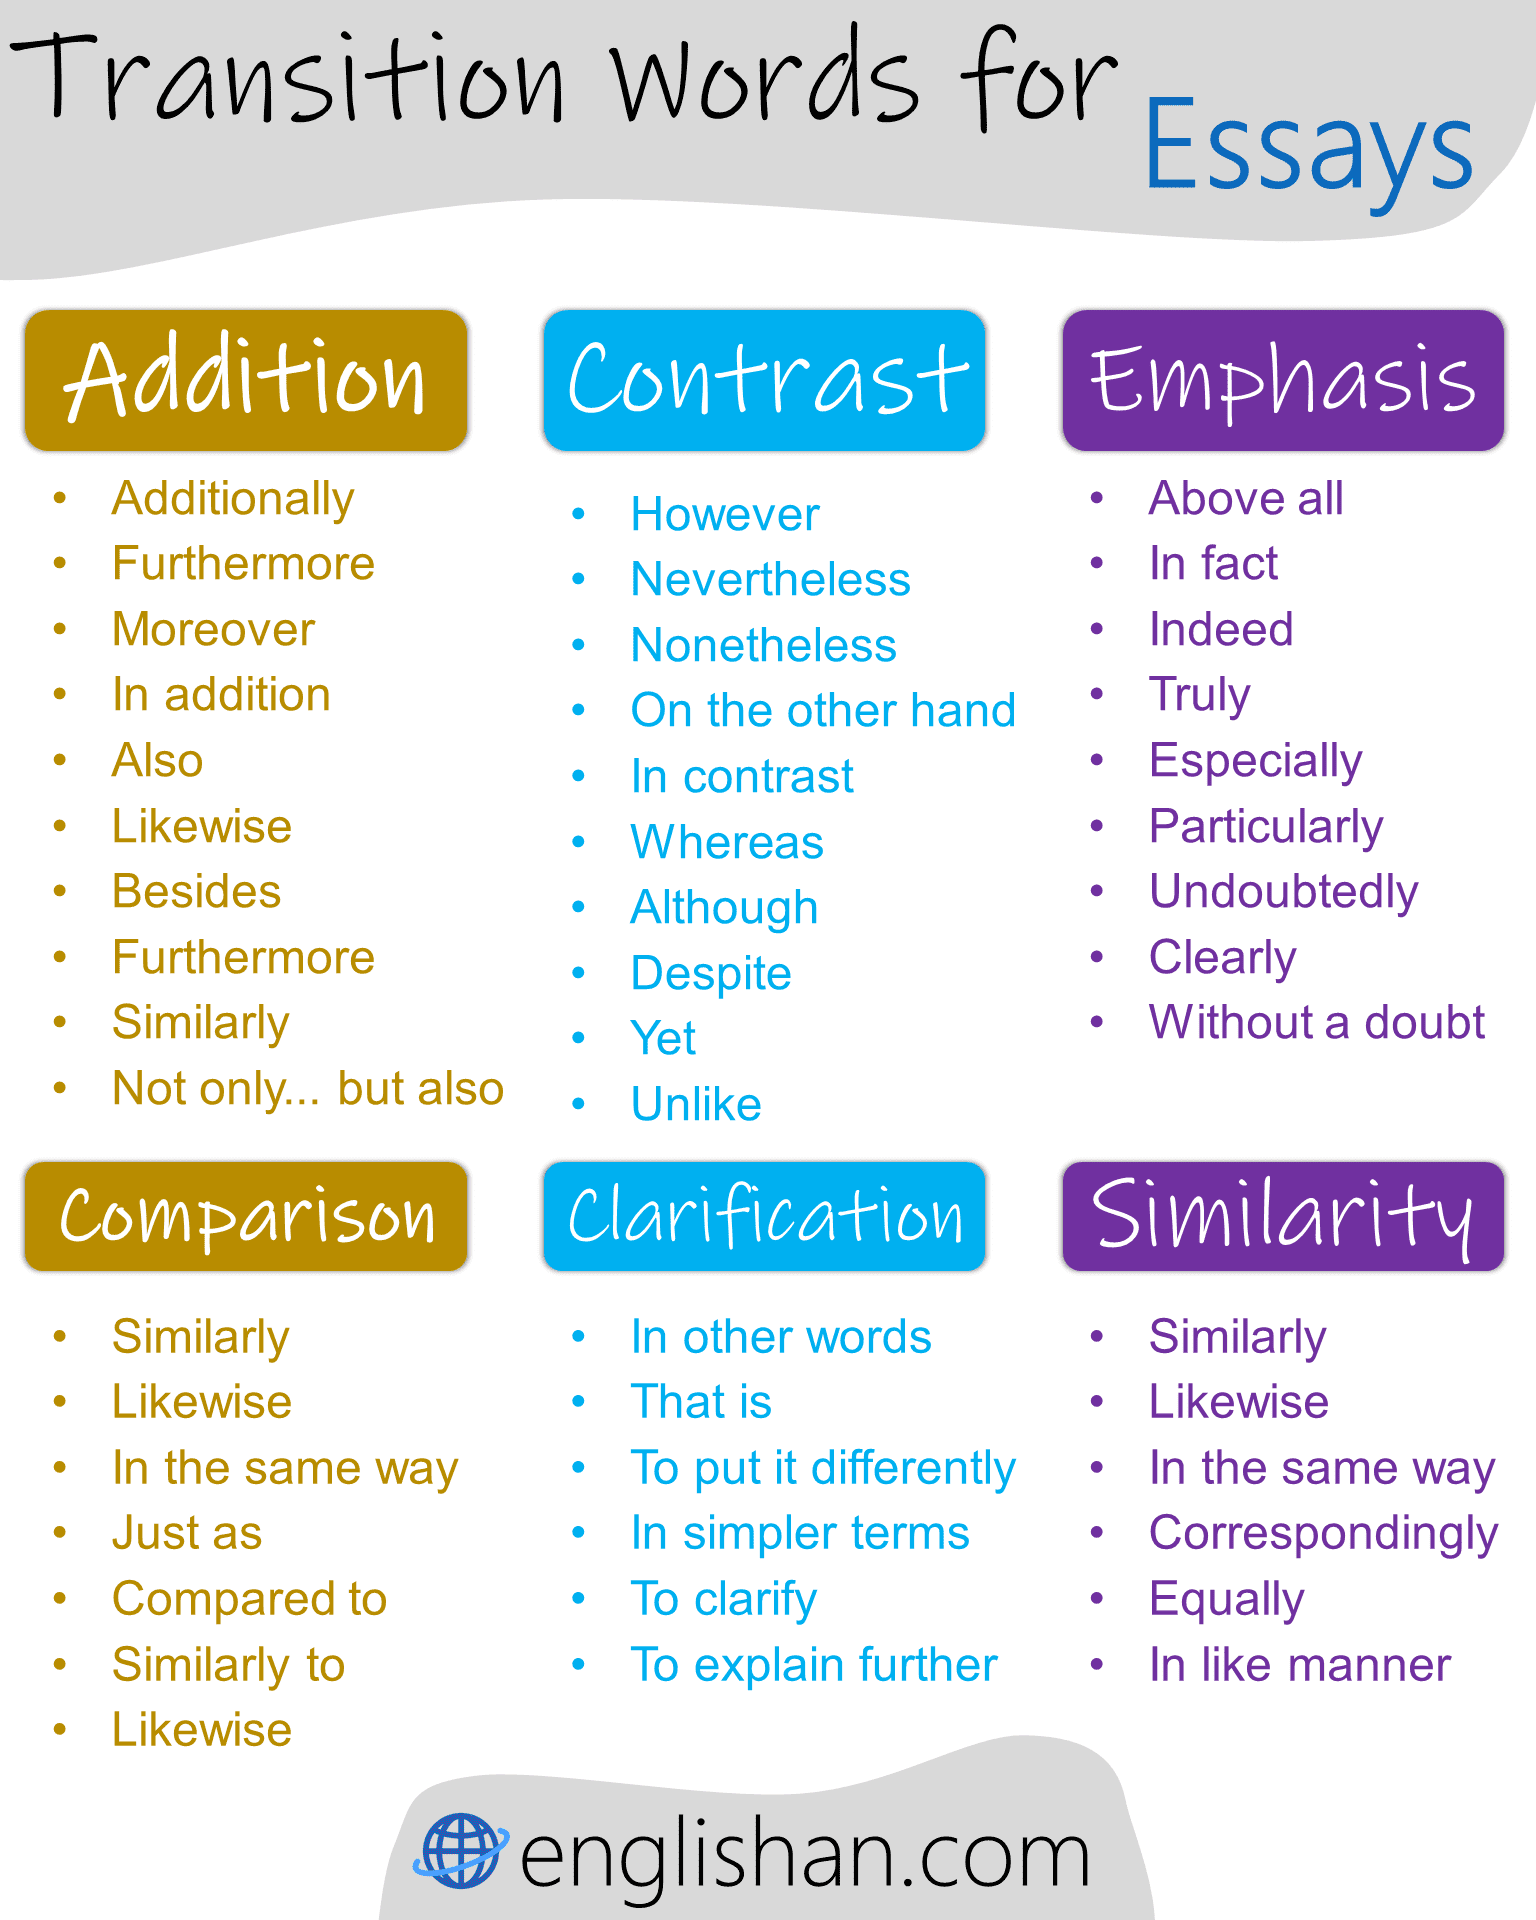 Transition Words for essays with Examples. List of Transitional Words for Writing effective Essays in English